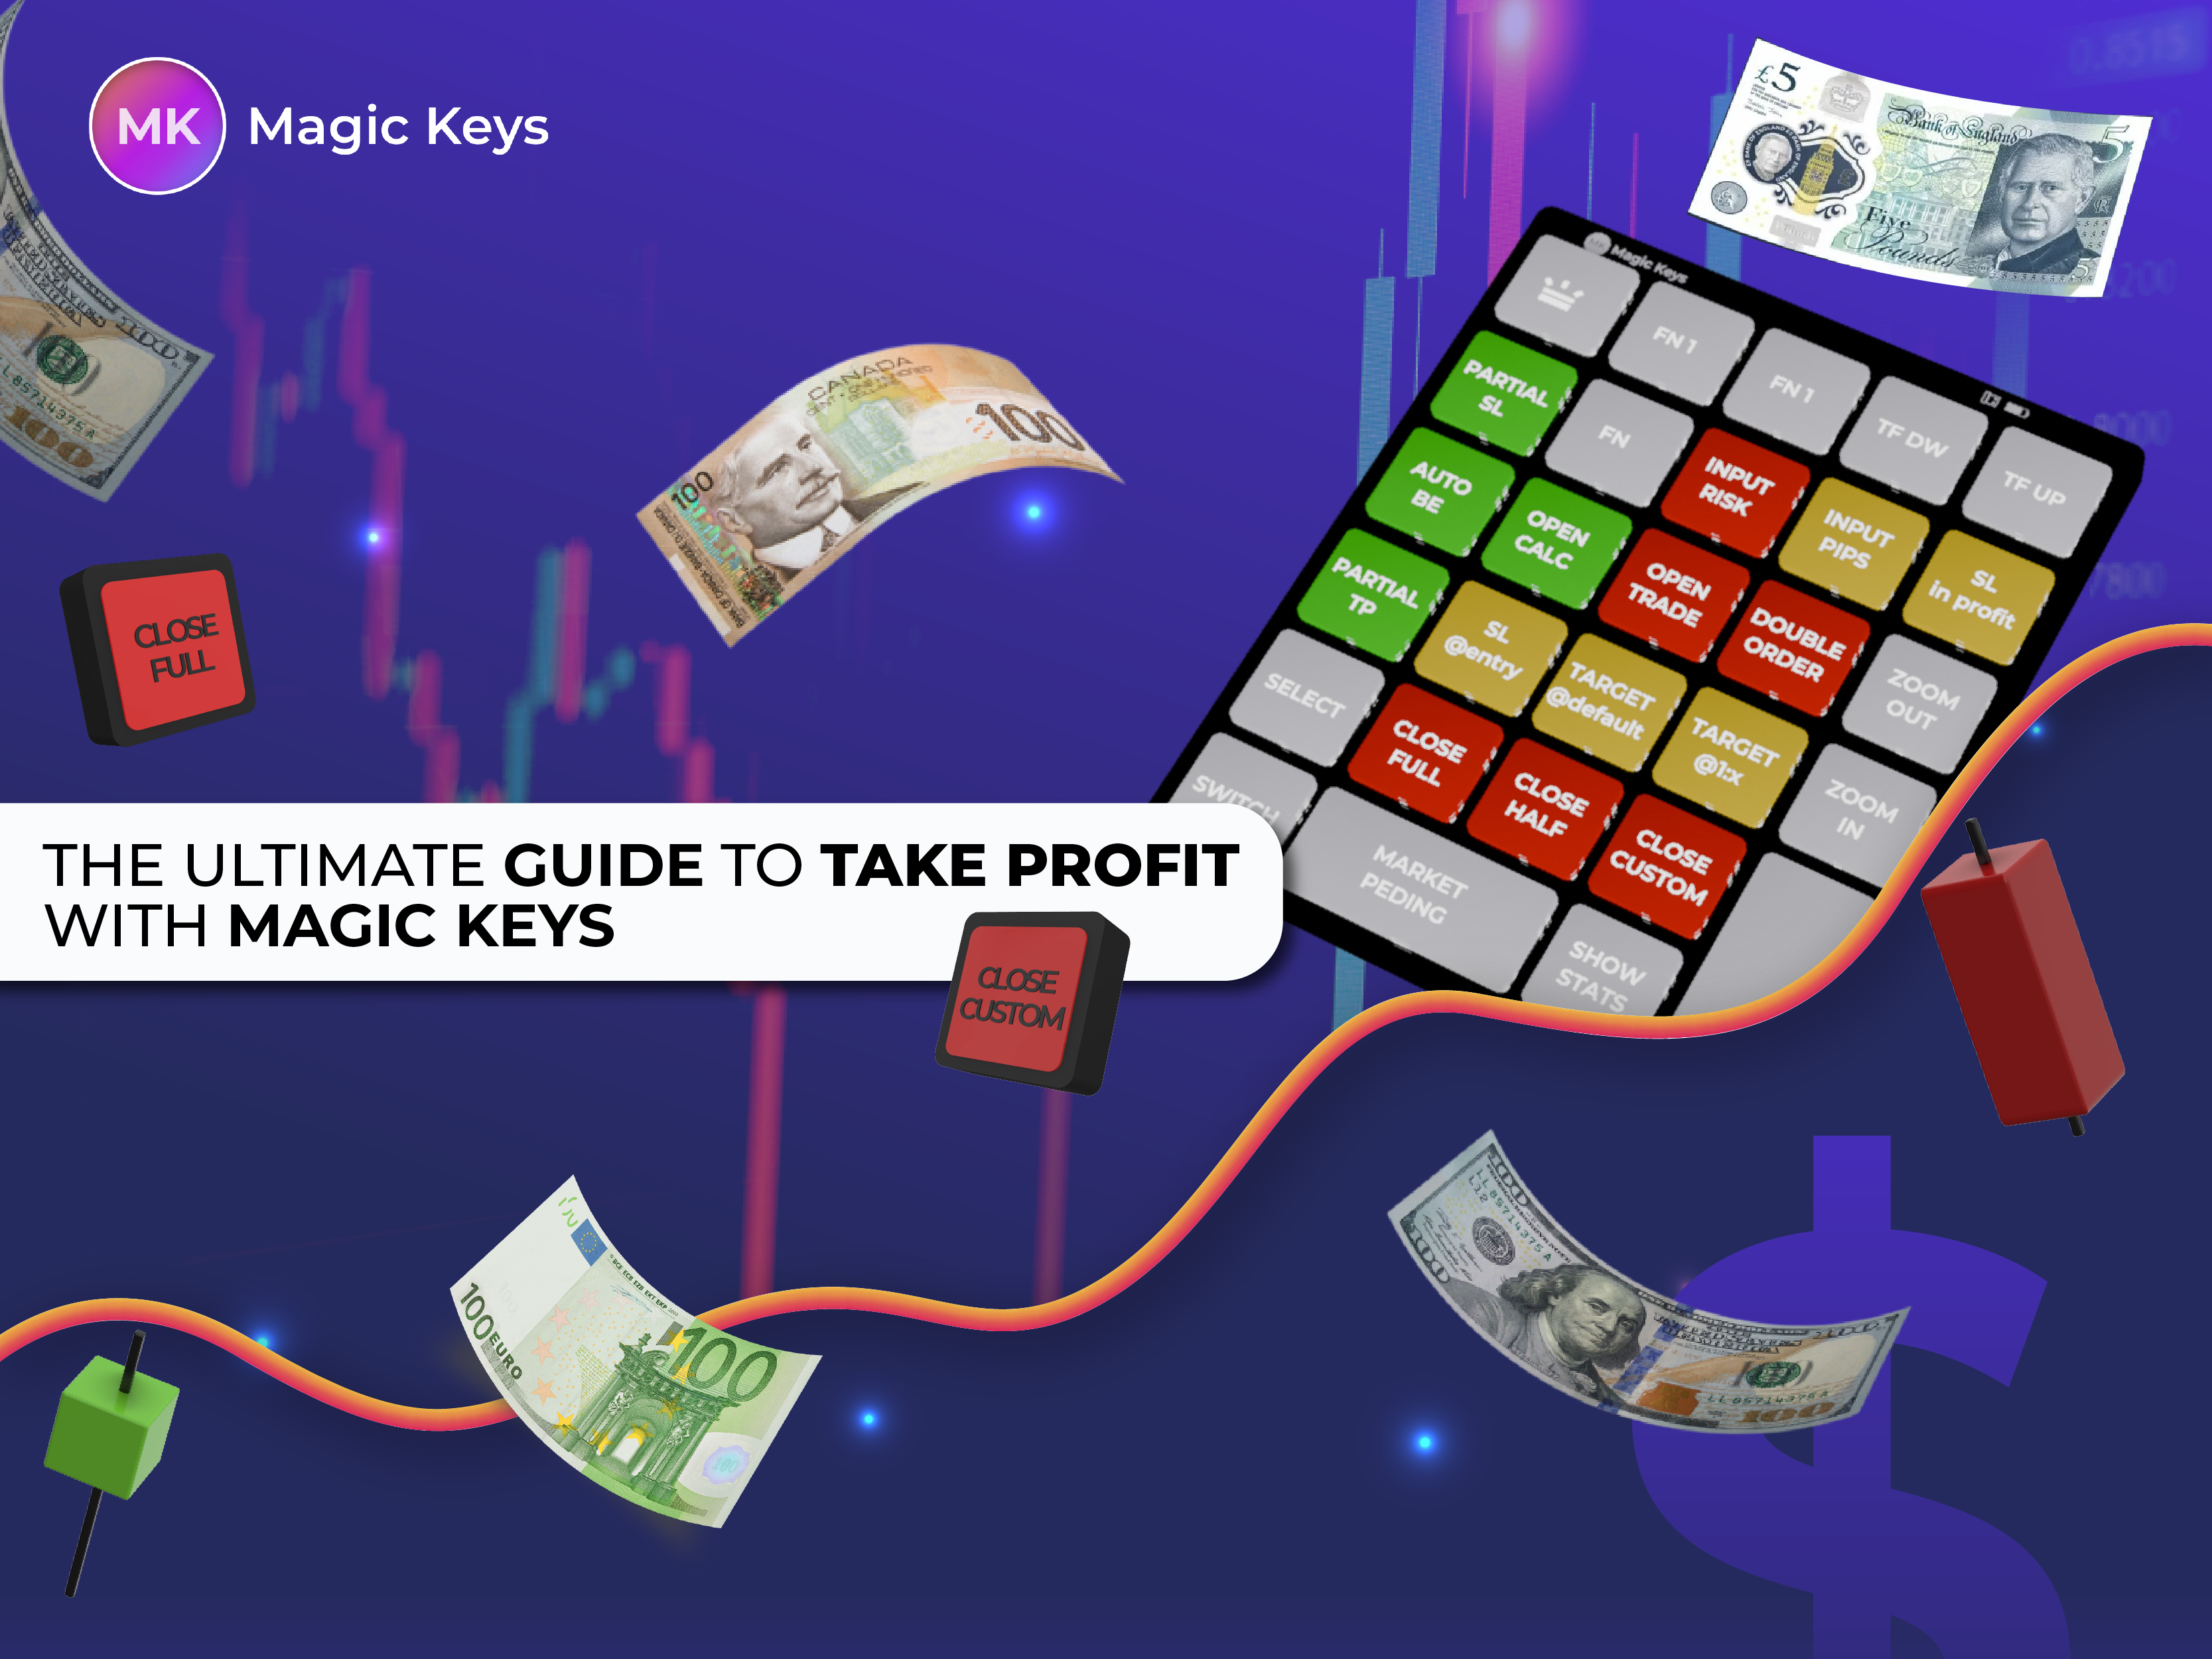 The Ultimate Guide to Take Profit with Magic Keys